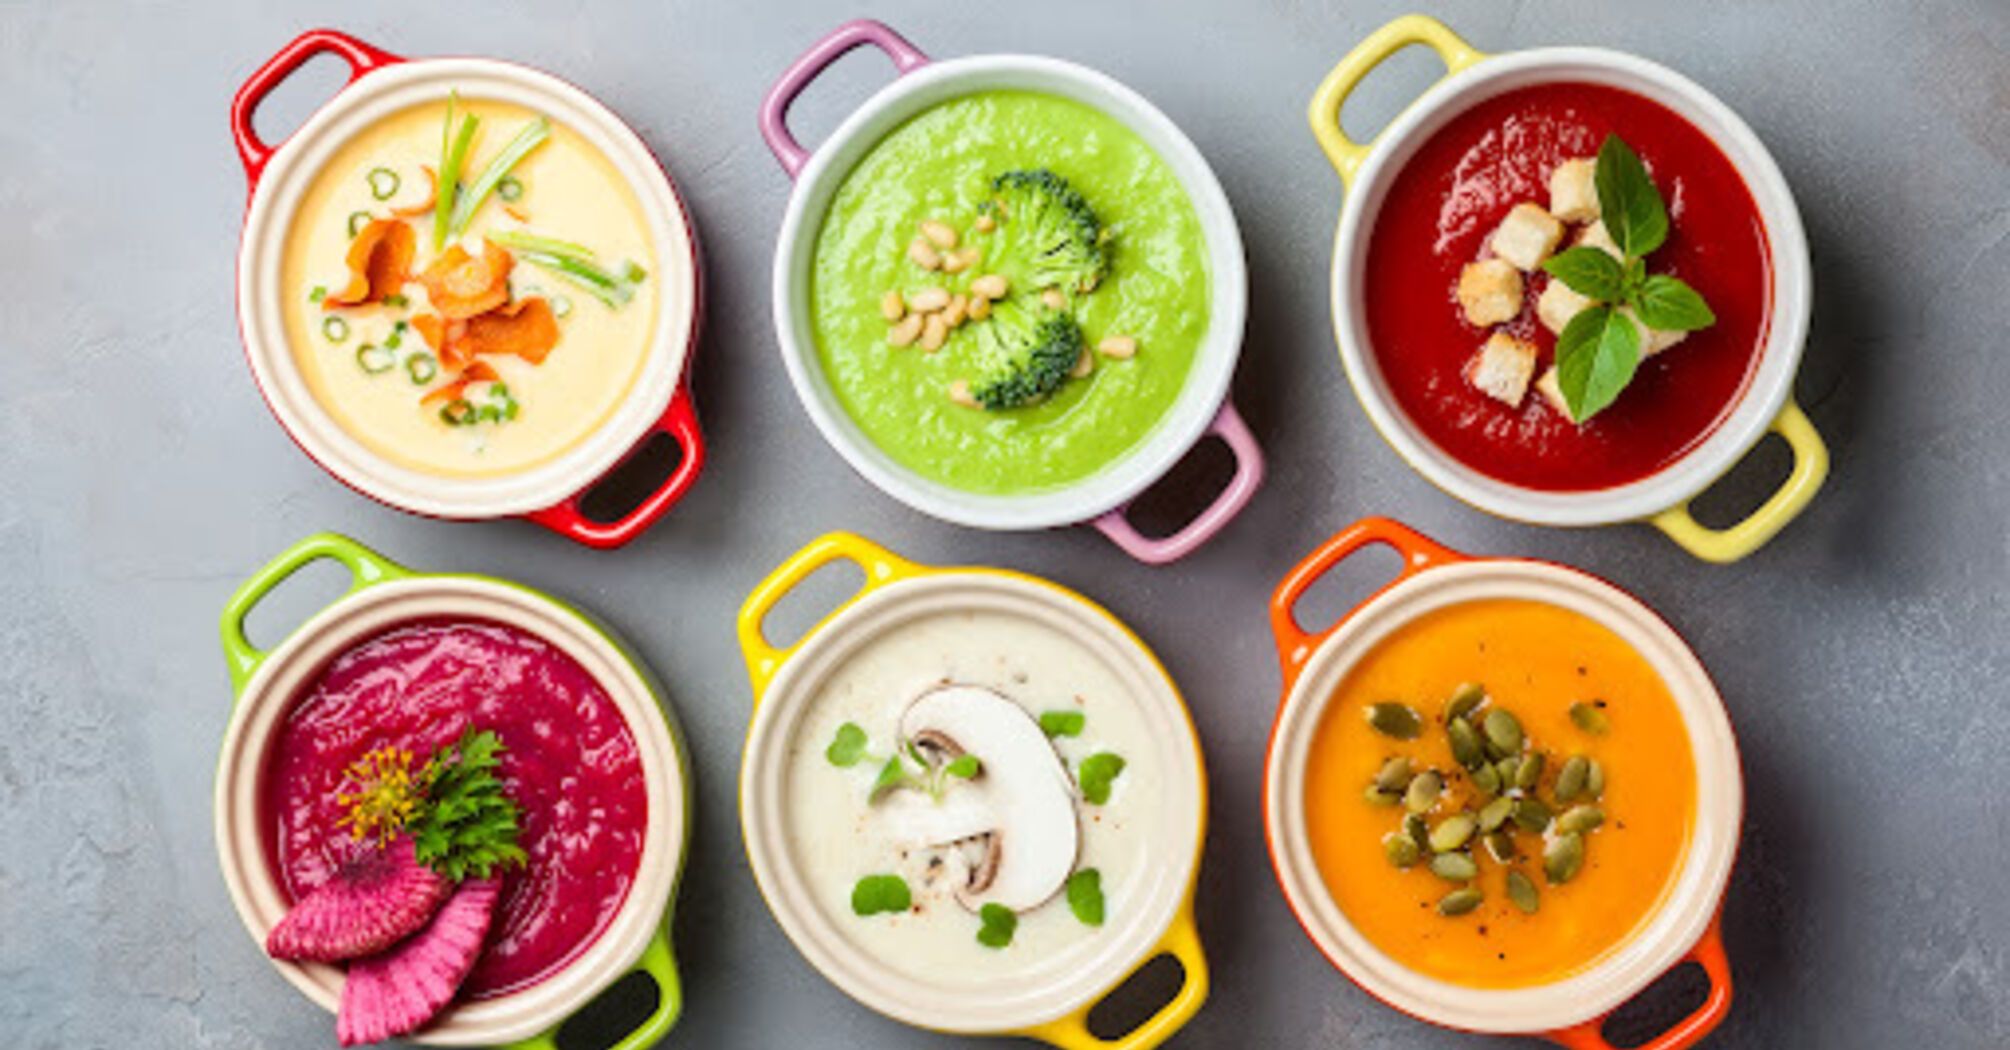 Nutritionists have named the healthiest soups that can be consumed daily